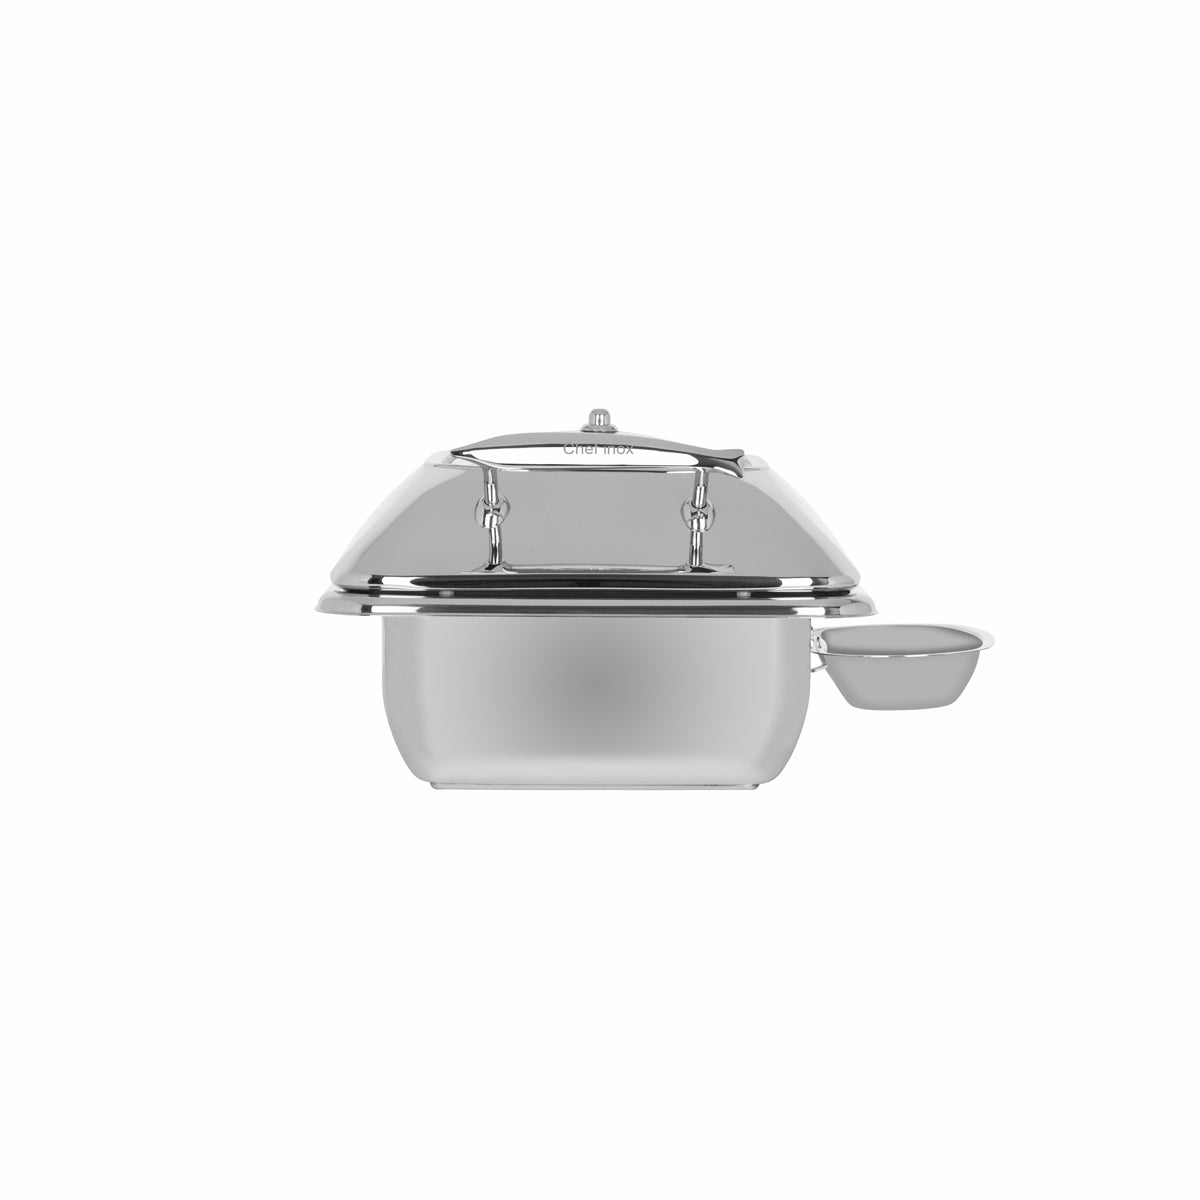 54912 Chef Inox Delux Chafer Rectangular 18/8 Stainless Steel 1/2 Size with Glass Lid Tomkin Australia Hospitality Supplies